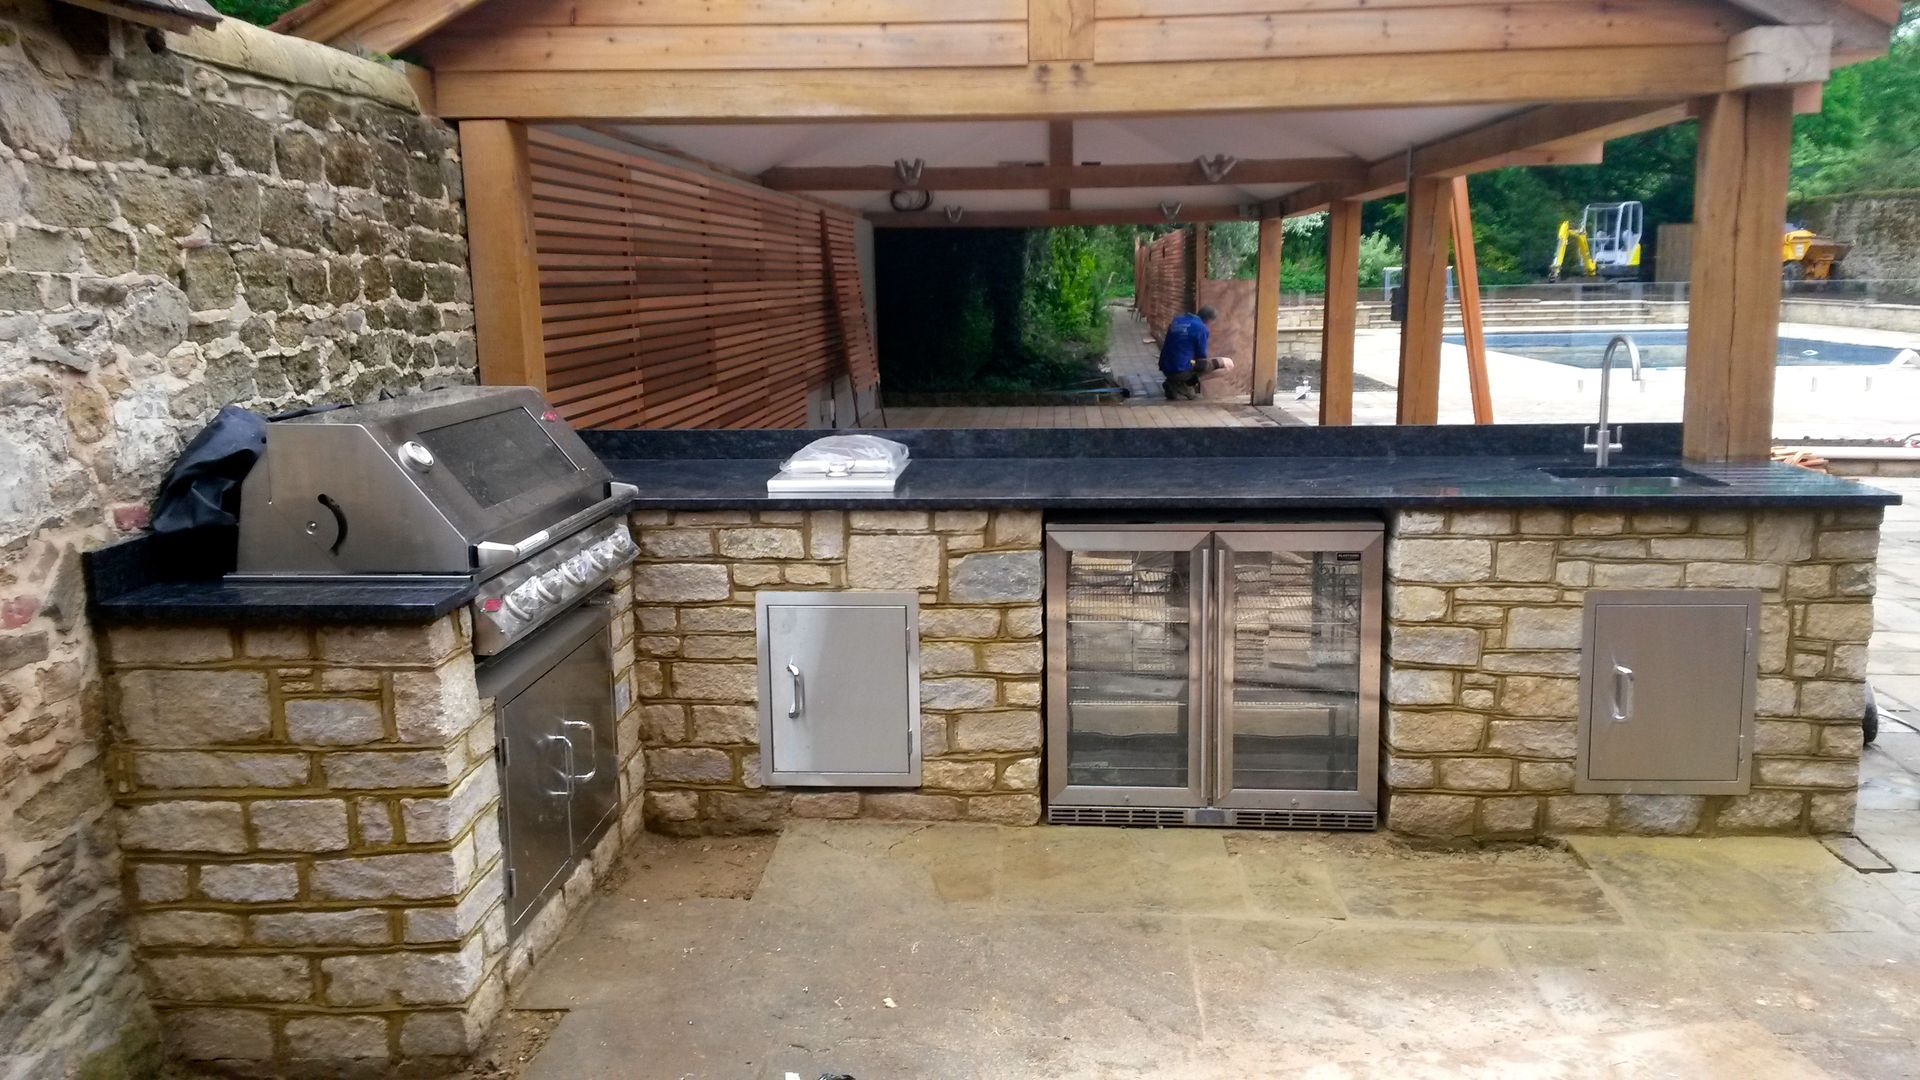 outdoor kitchen, wood-fired oven wood-fired oven Modern style gardens outdoor kitchen,BBQ